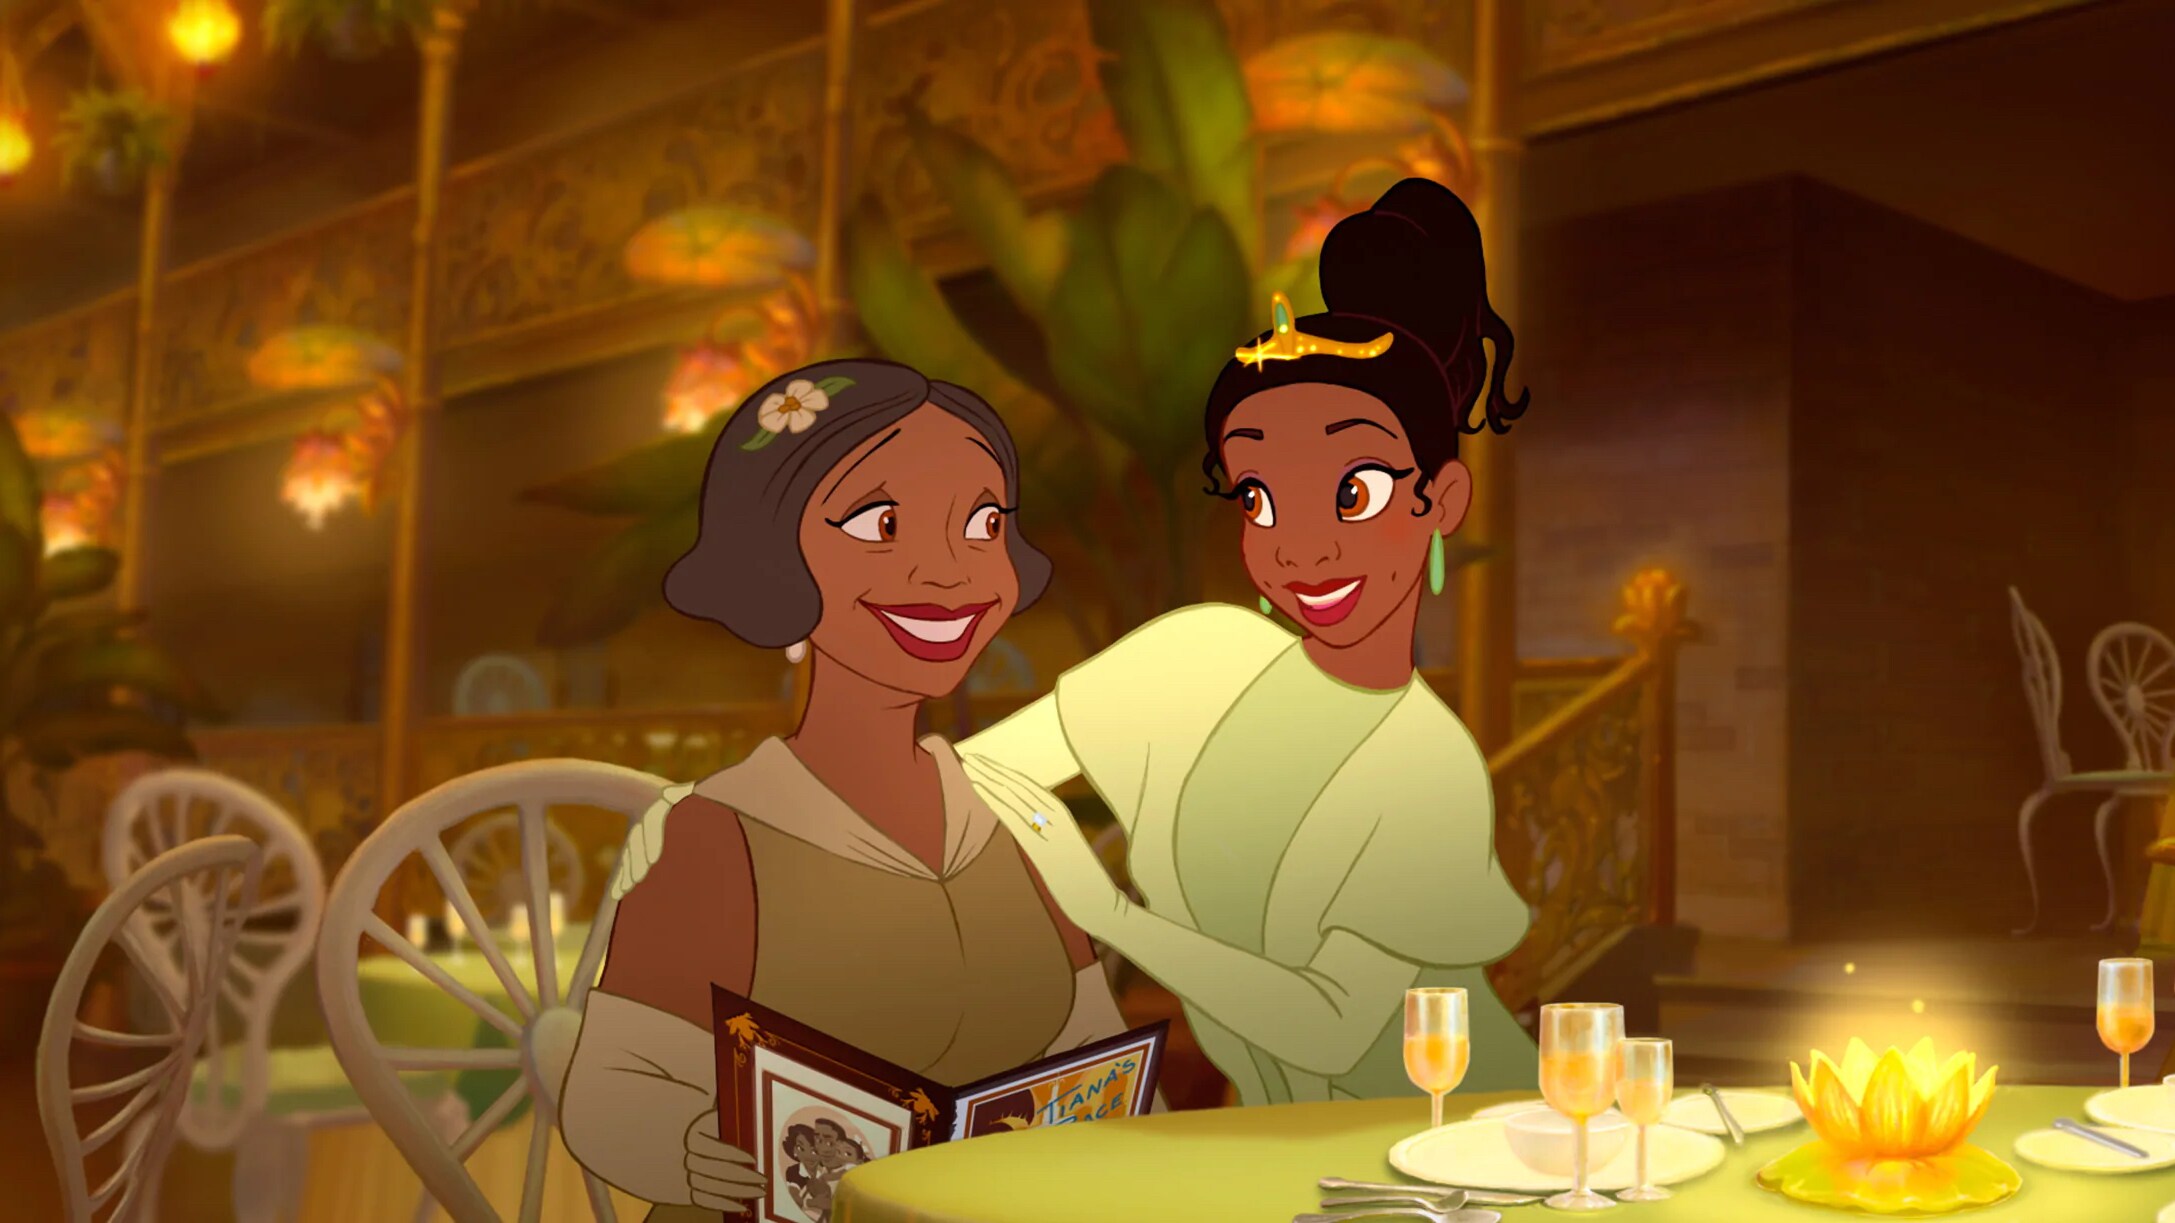 Tiana greeting her mom in her dream restaurant.